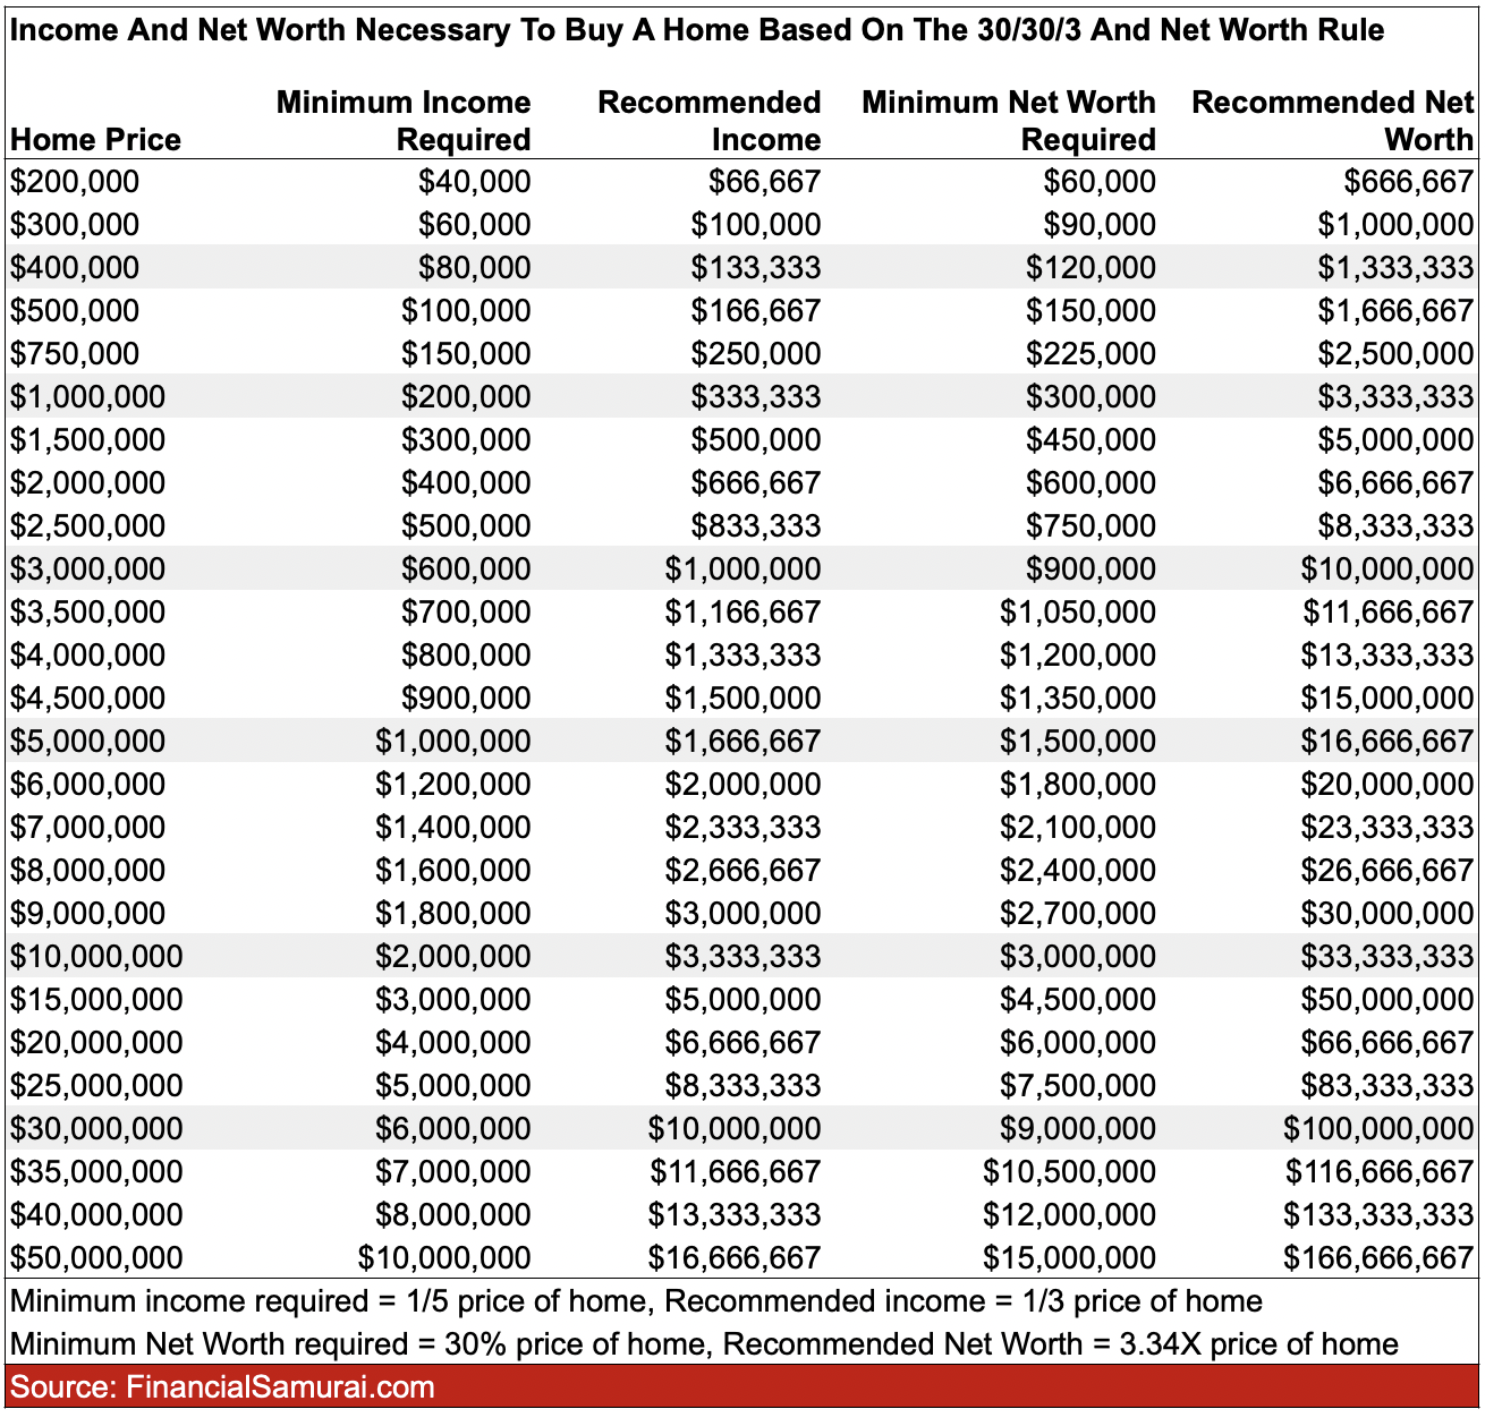 Different levels of Net worth required to buy a home at different price points